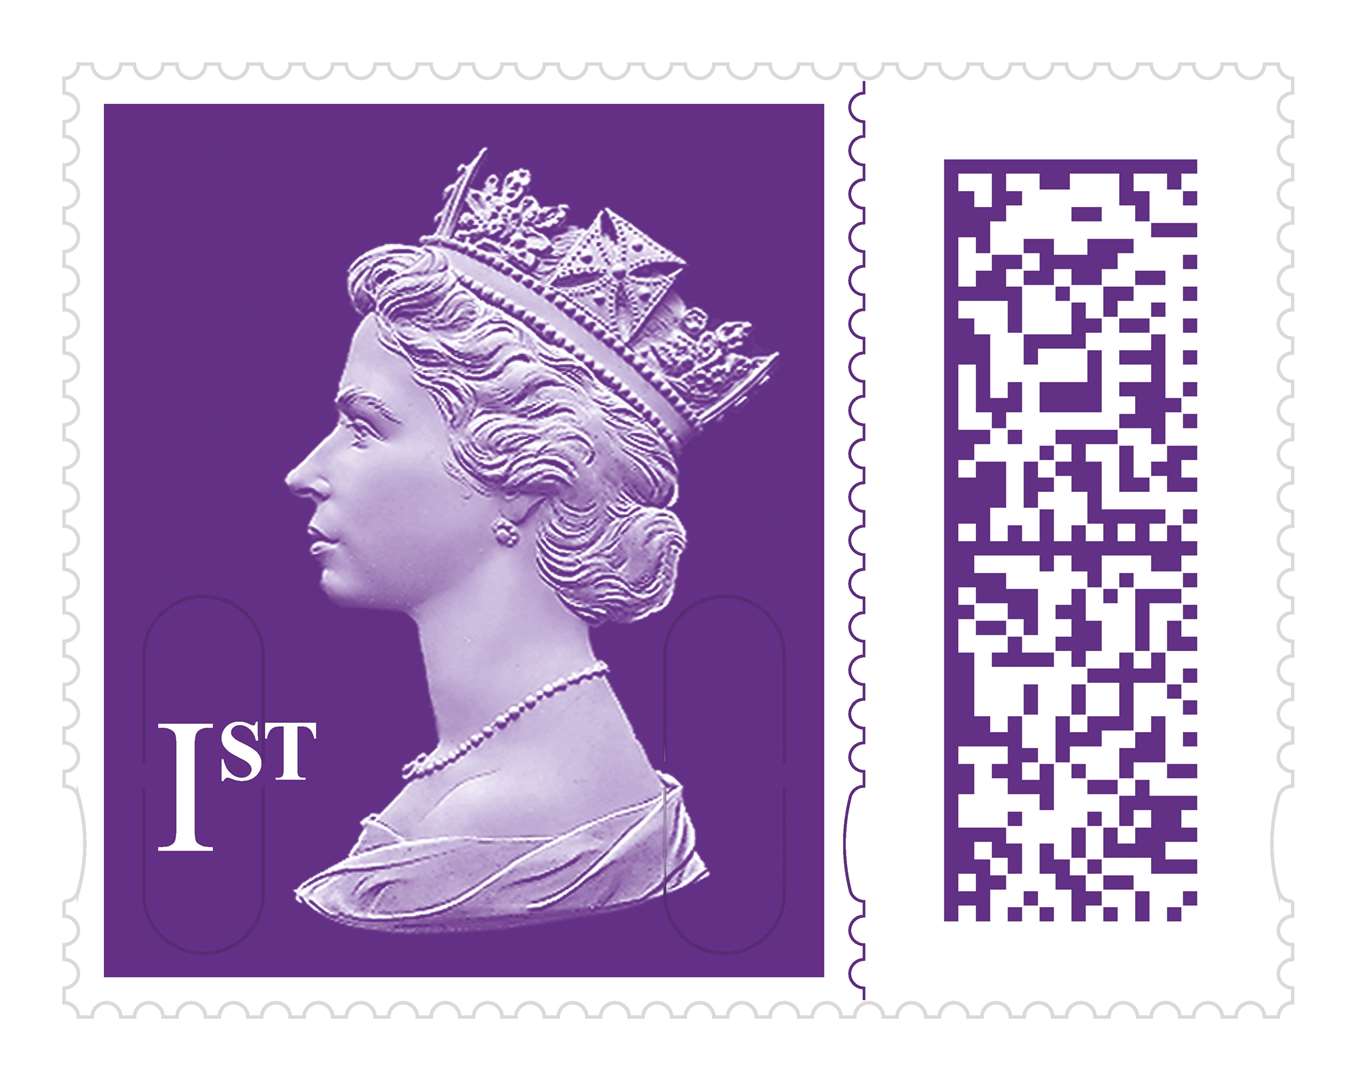 Stamps featuring a barcode were unveiled in February. Image: Royal Mail.